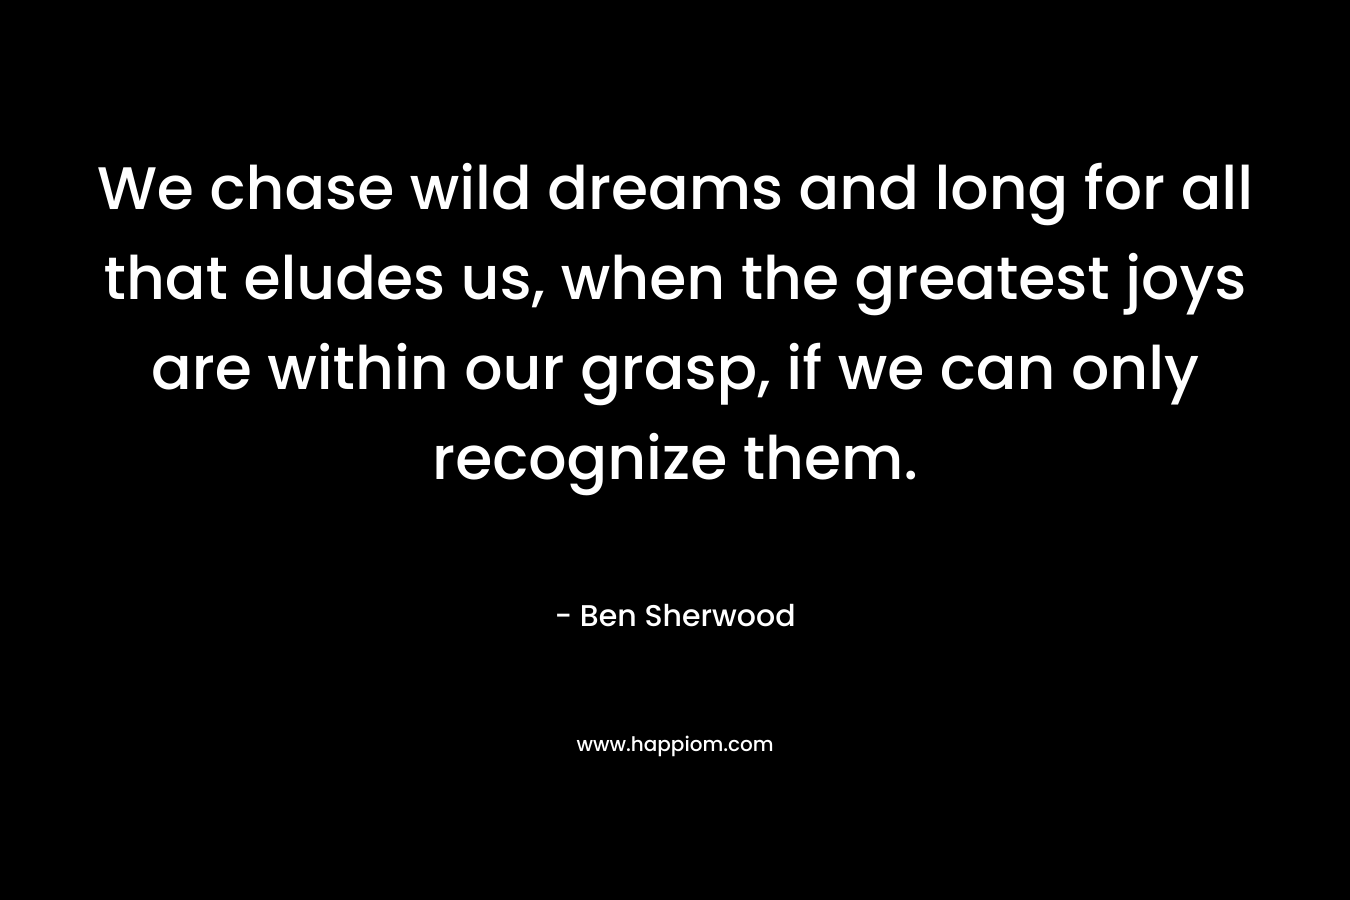 We chase wild dreams and long for all that eludes us, when the greatest joys are within our grasp, if we can only recognize them.